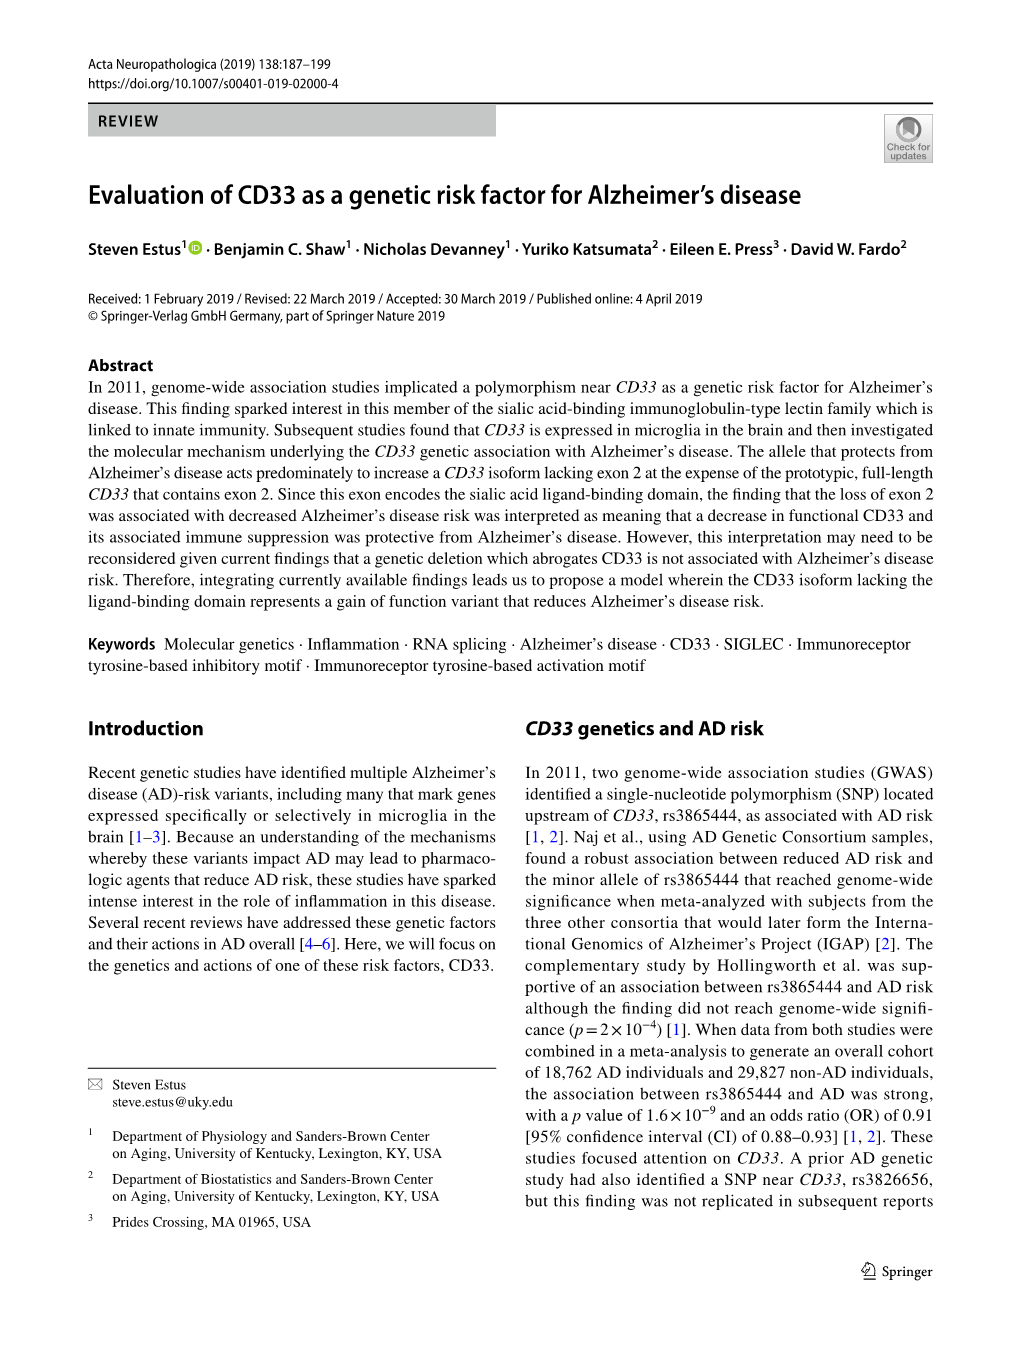 Evaluation of CD33 As a Genetic Risk Factor for Alzheimer's Disease